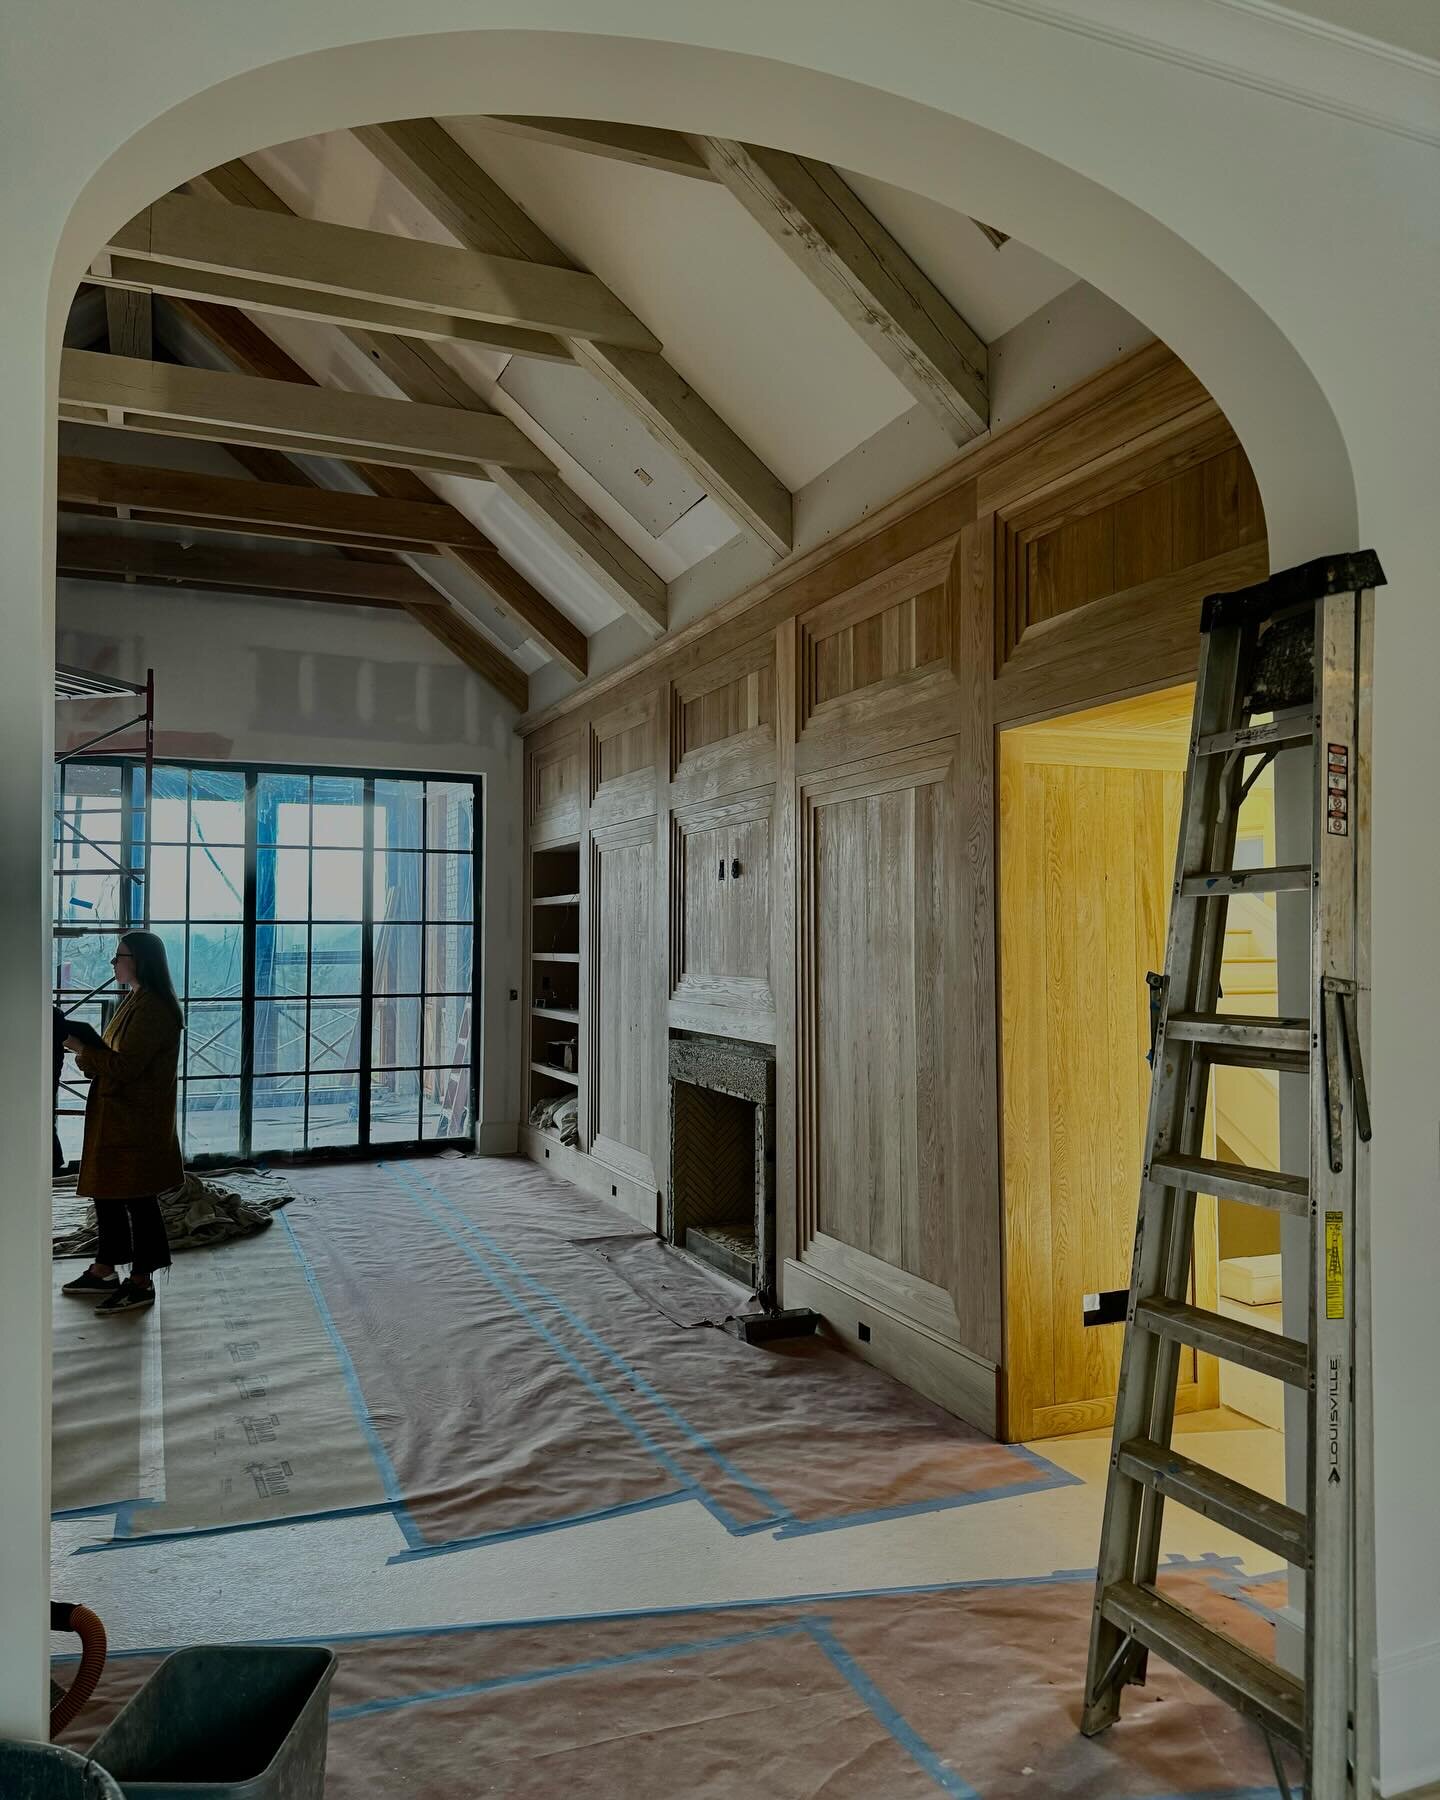 Progress on our Dell Road project. Fireplace will be blue Belgian limestone. 
&darr; 
&darr;
&darr;
#architect #TraditionalDesign #ArchitectDesigned #TraditionalHouse #HomeInspiration #Homeinspo #HouseDesign #TraditionalArchitecture #TraditionalHome 